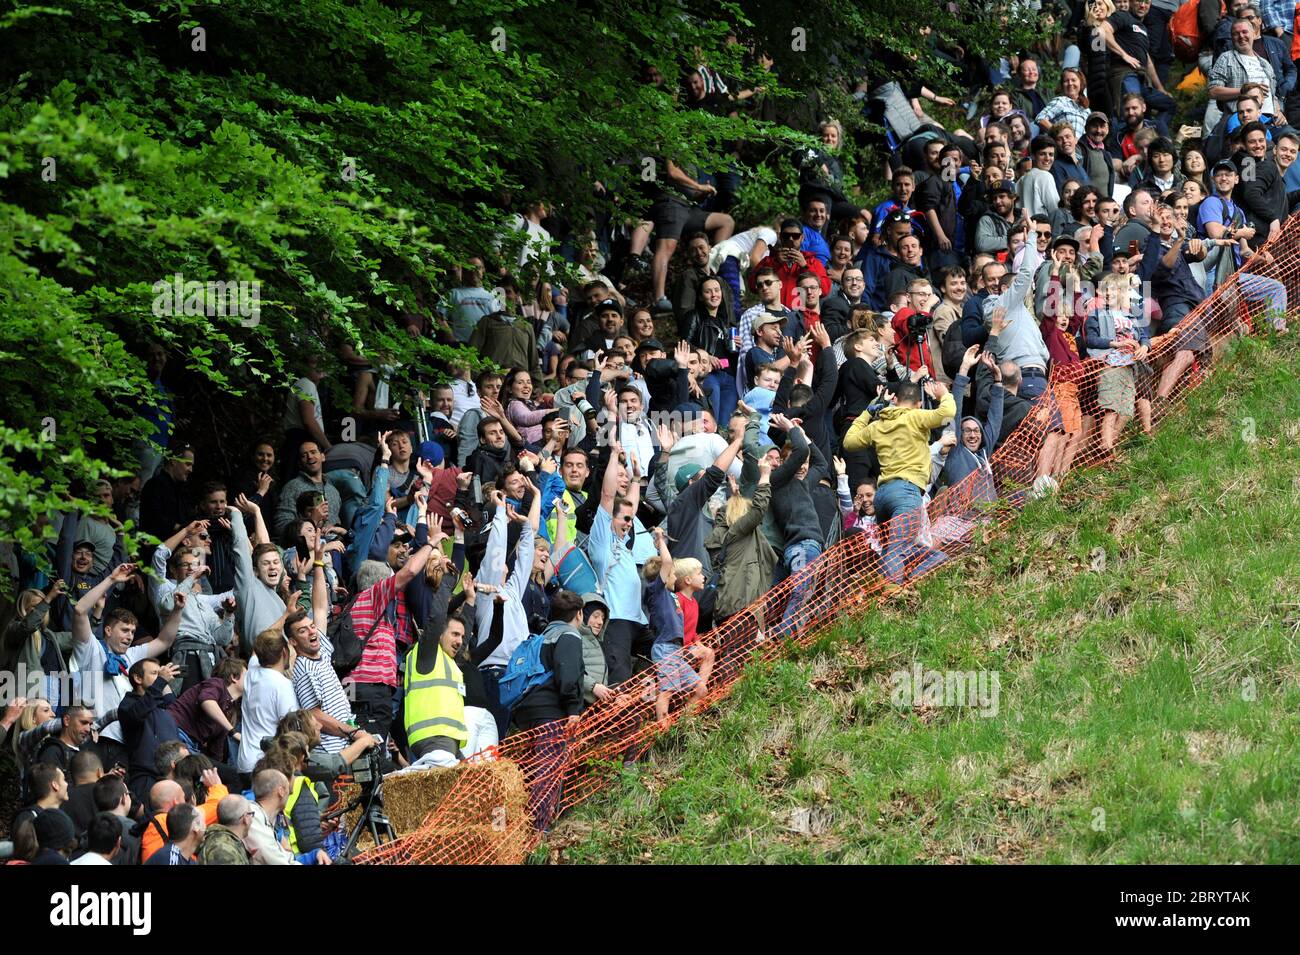 Cheese Rolling down Cooper's Hill, Brockworth near Gloucester   The crowds get in the spirit of it with a Mexican wave    Picture by Mikal Ludlow Phot Stock Photo